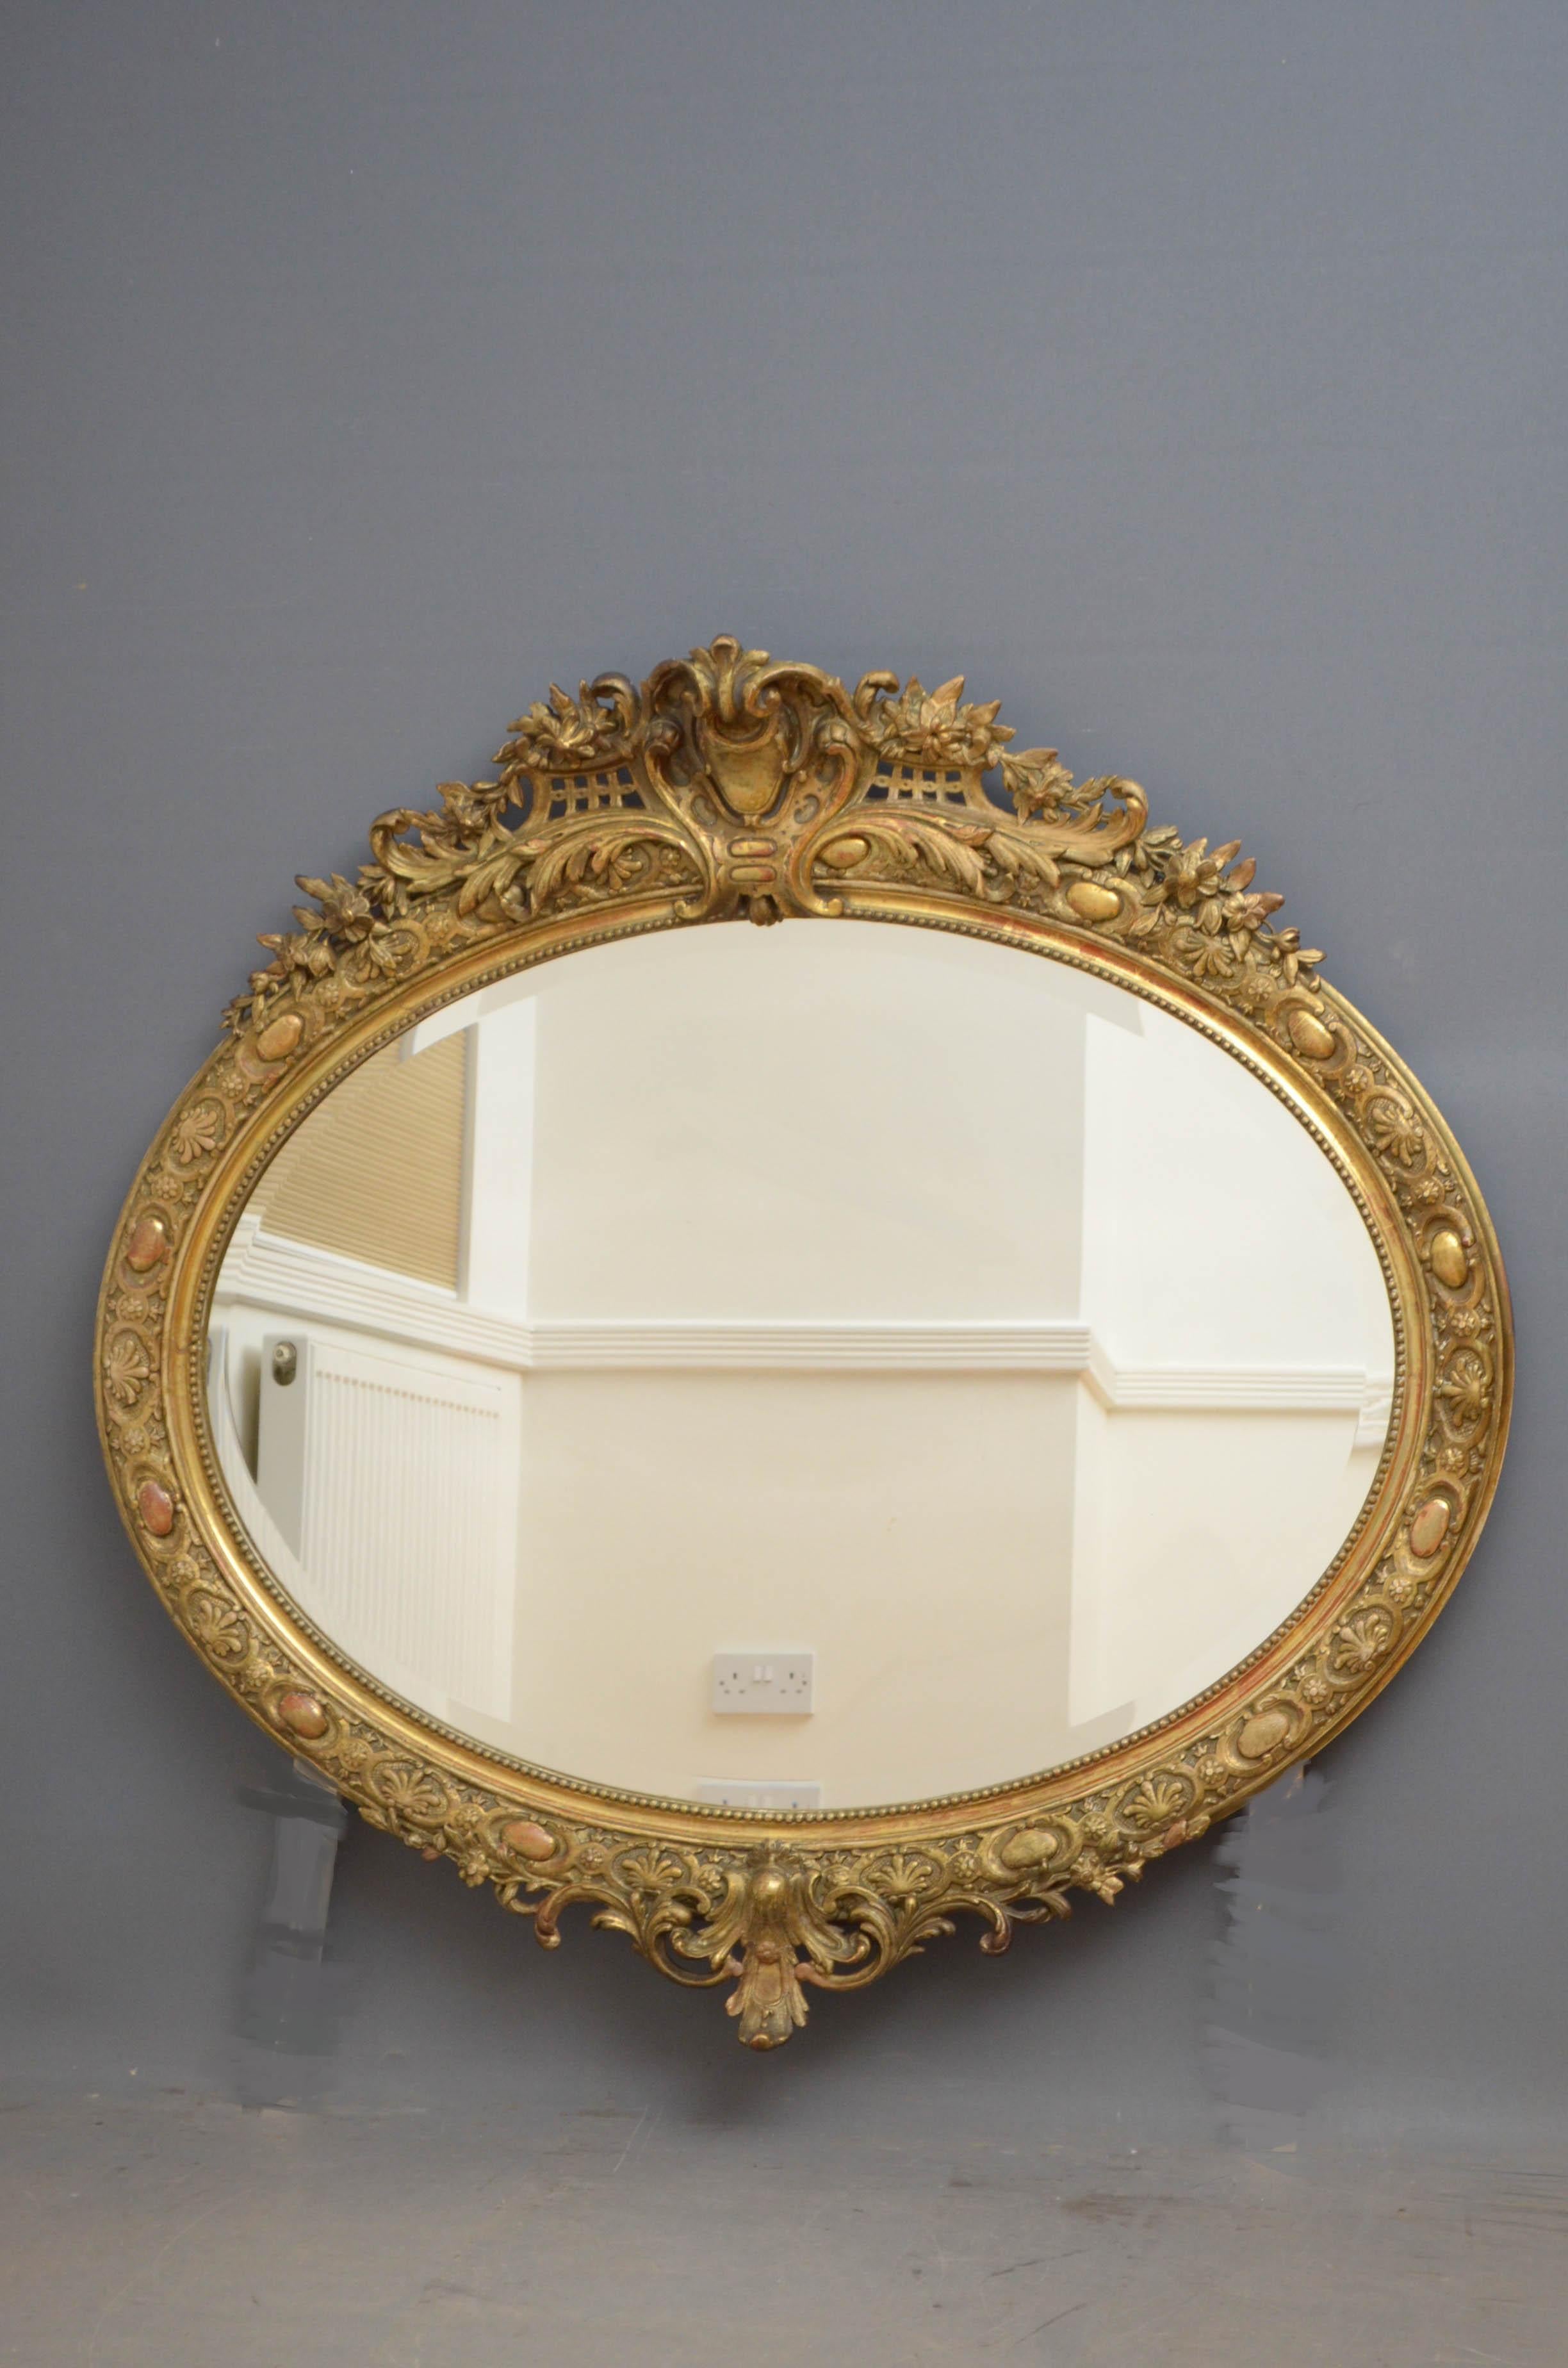 Sn4761, large Victorian period oval wall mirror, having original bevelled edge glass with some foxing in finely carved frame with centre crest to top and base, all in excellent home ready condition, circa 1880
Measures: H 50